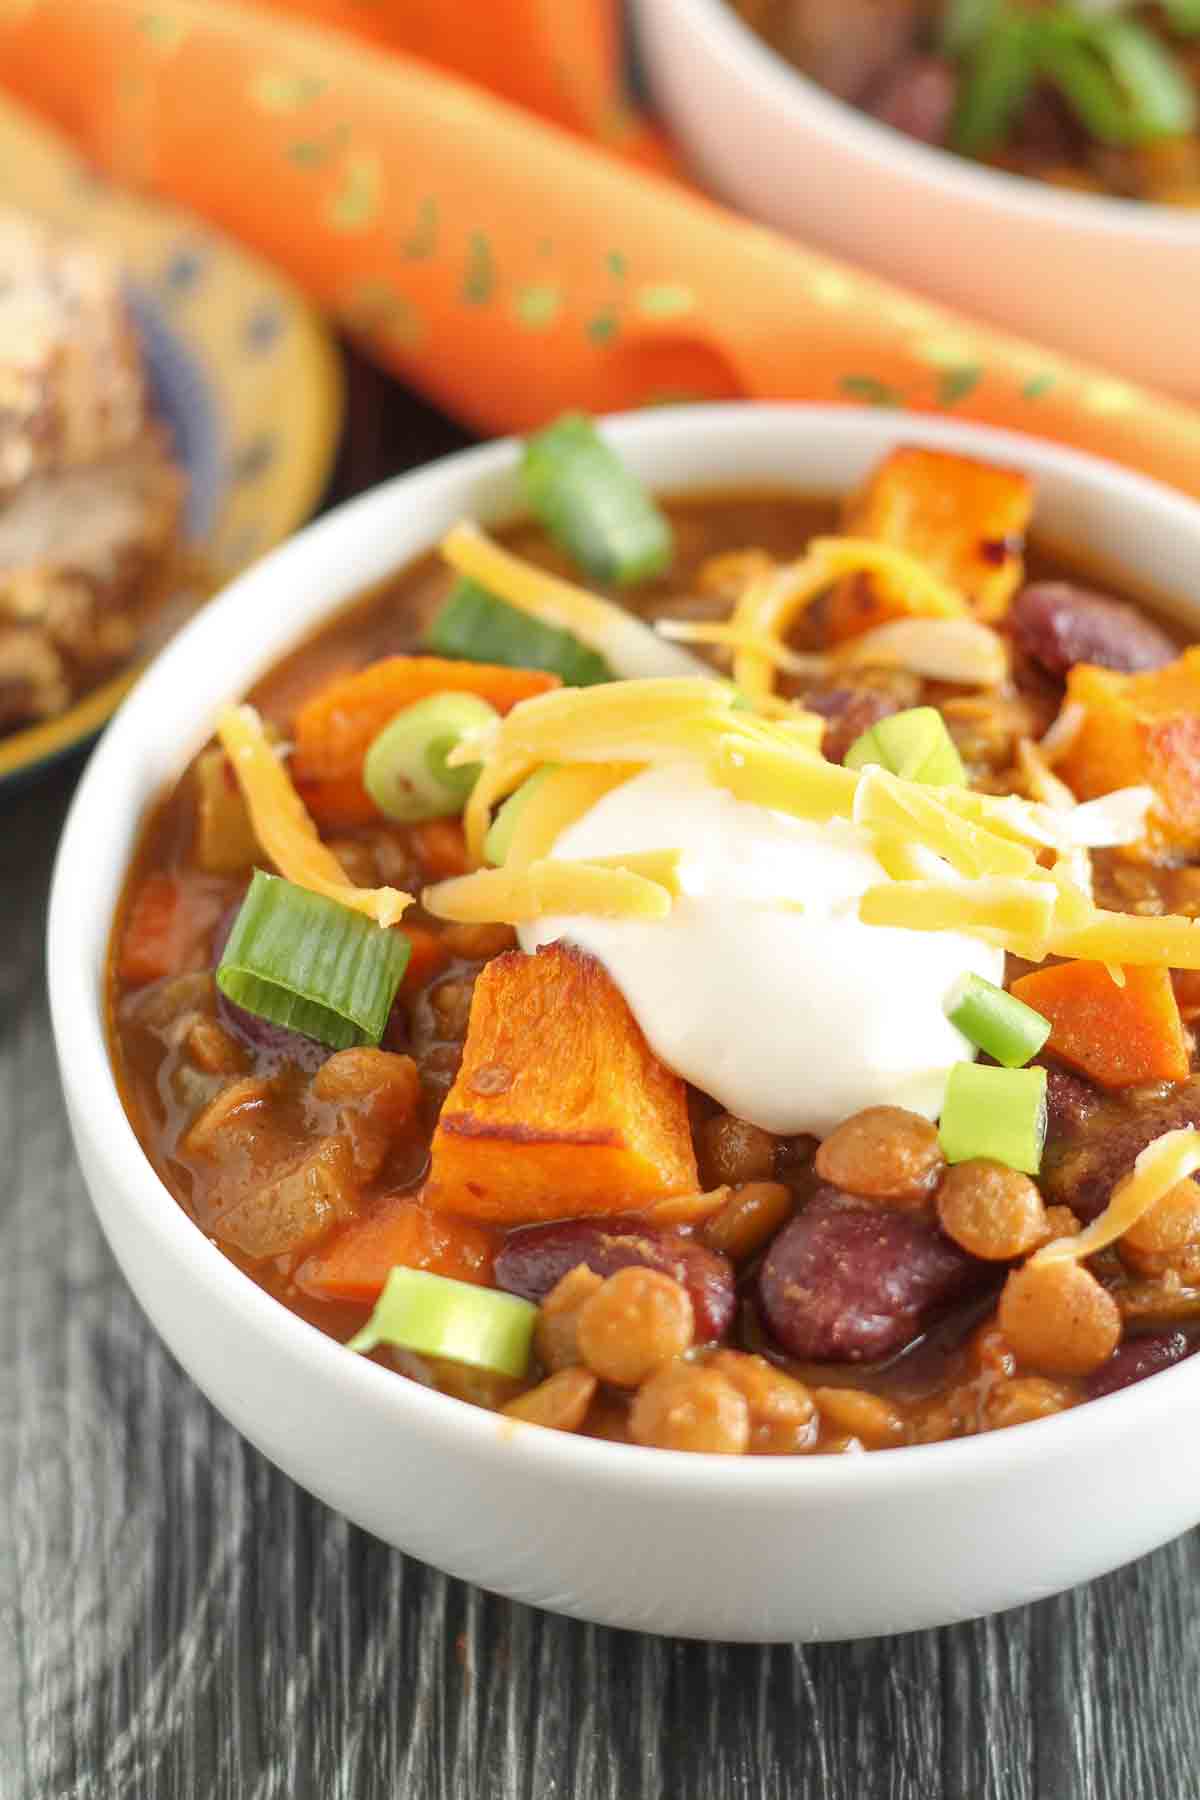 vegetarian lentil chili with roasted butternut squash garnished with green onions